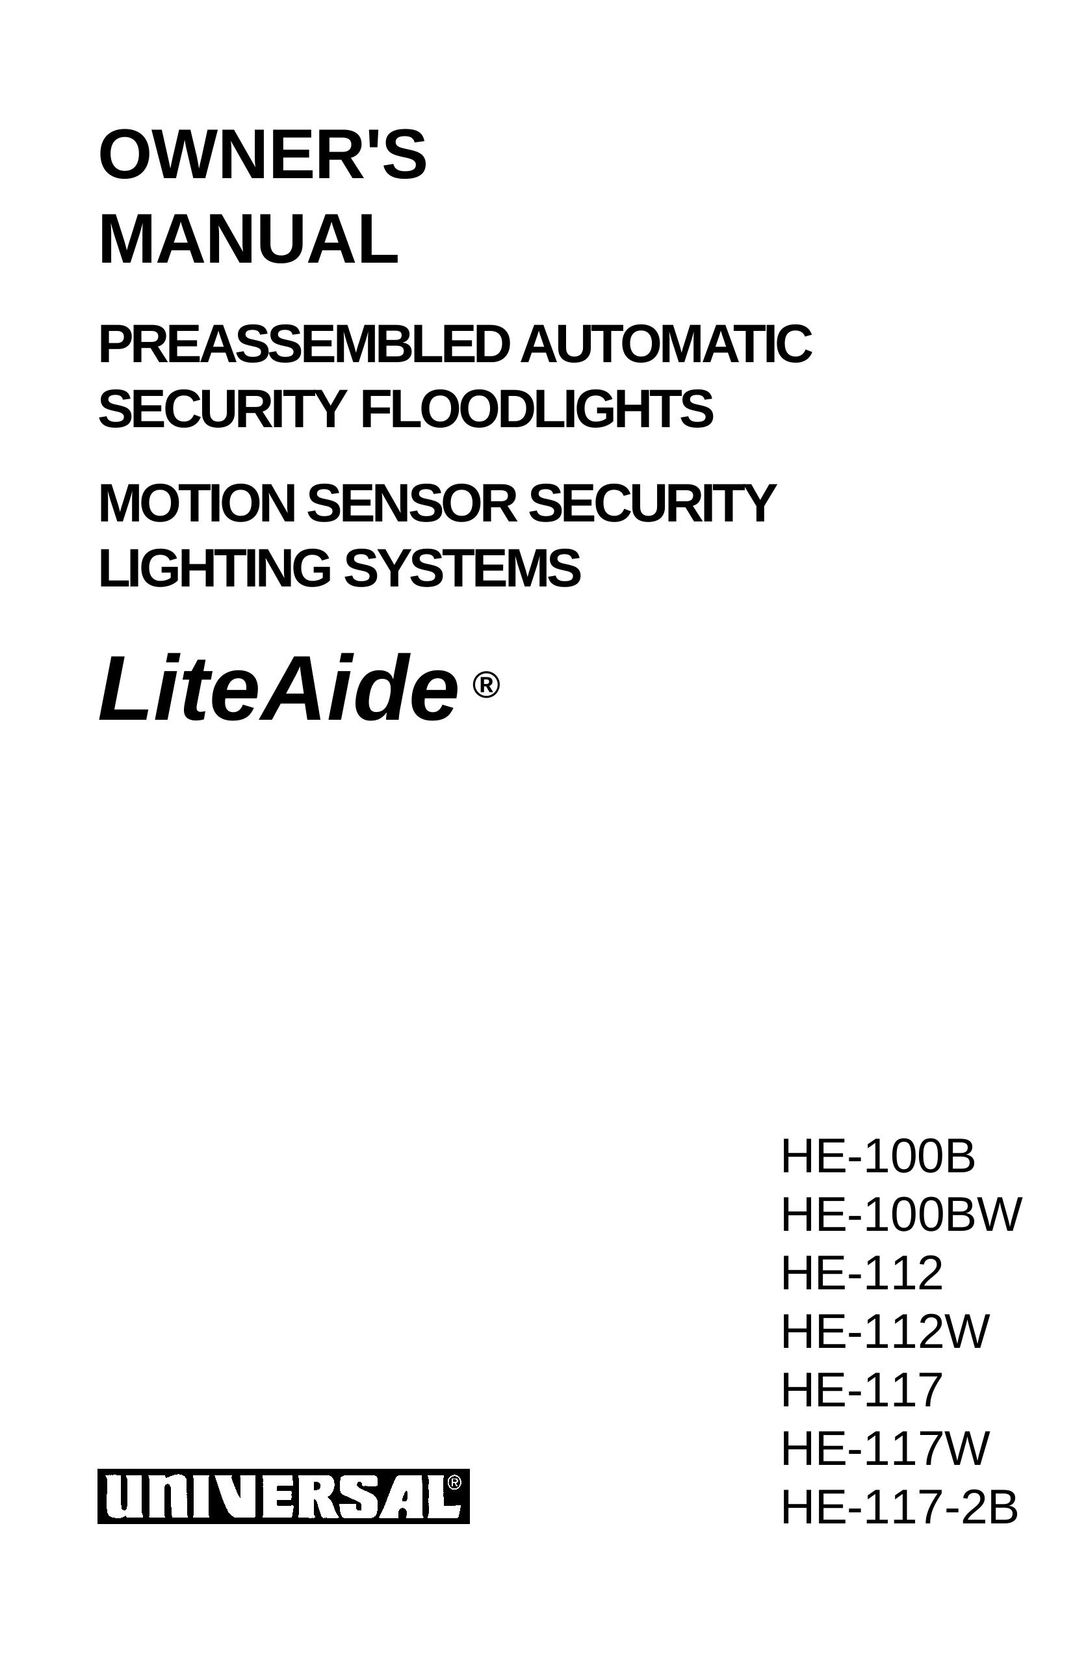 Universal HE-100BW Home Security System User Manual